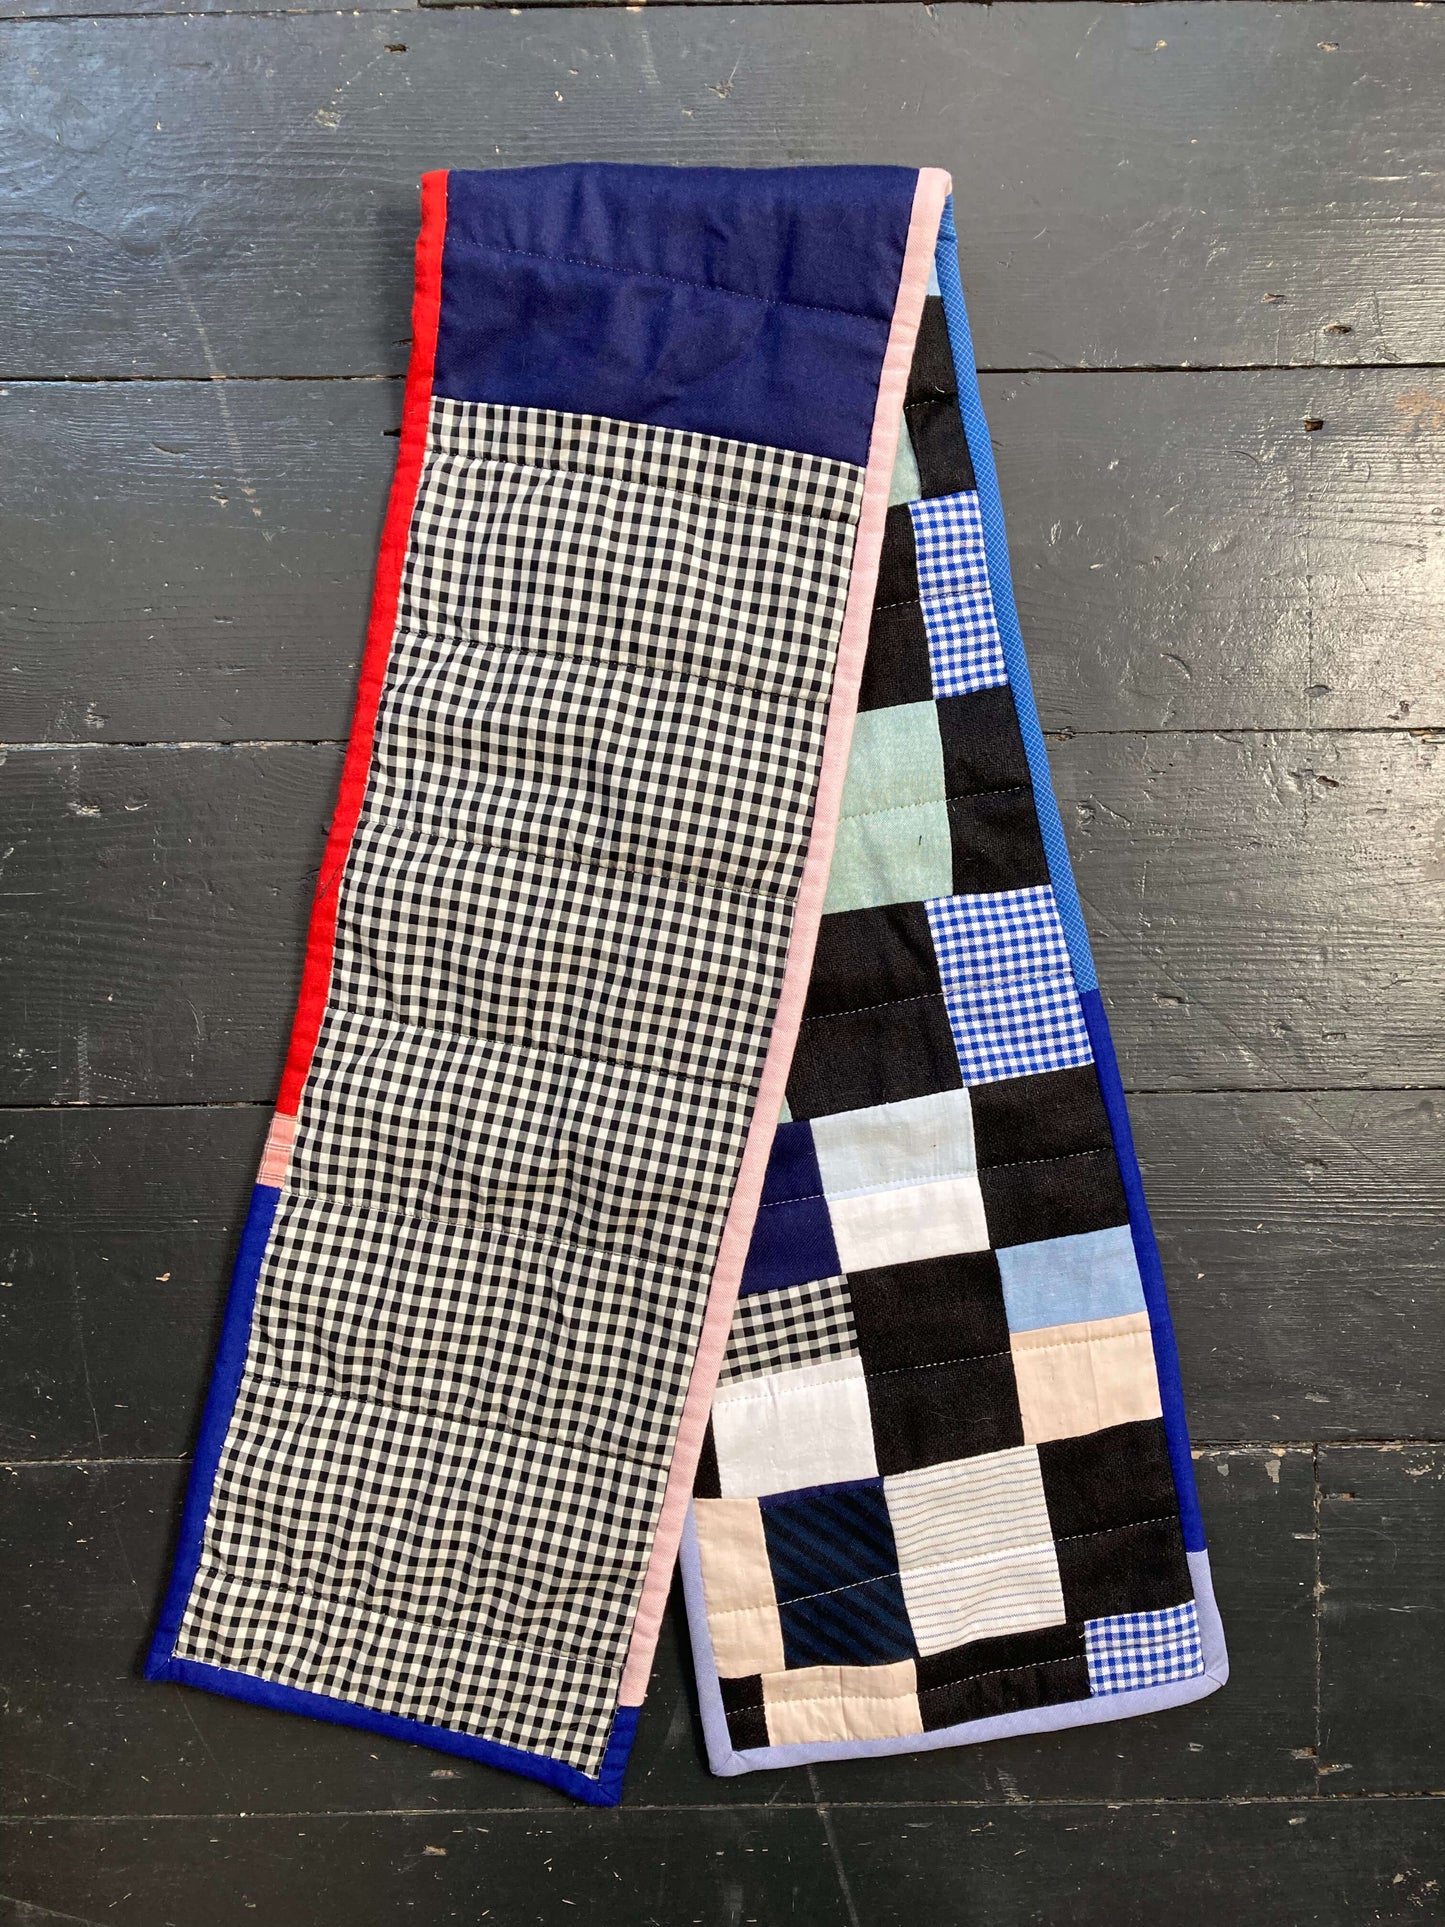 patchwork quilted scarf made from reclaimed cotton fabrics, image shows the back and the front